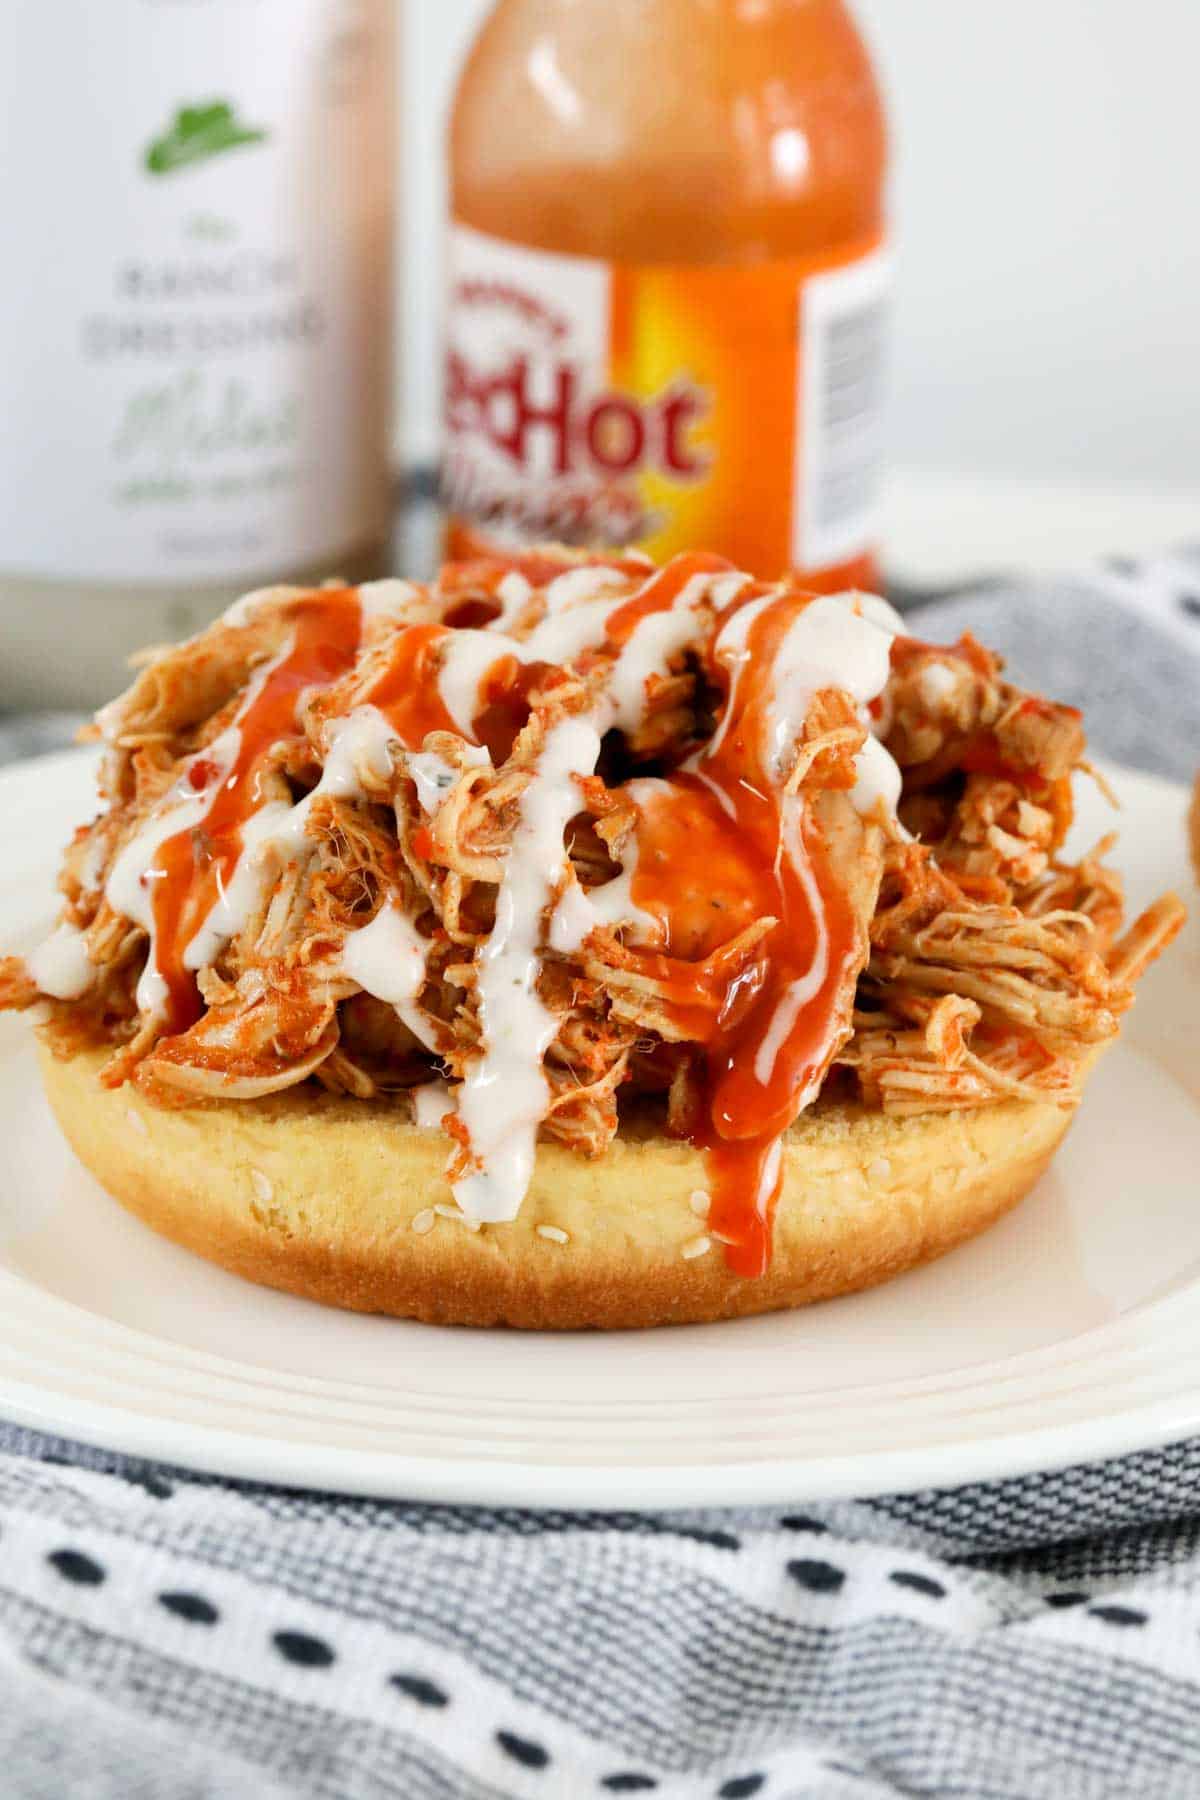 A hot sauce and ranch dressing drizzled over a shredded spicy chicken burger.